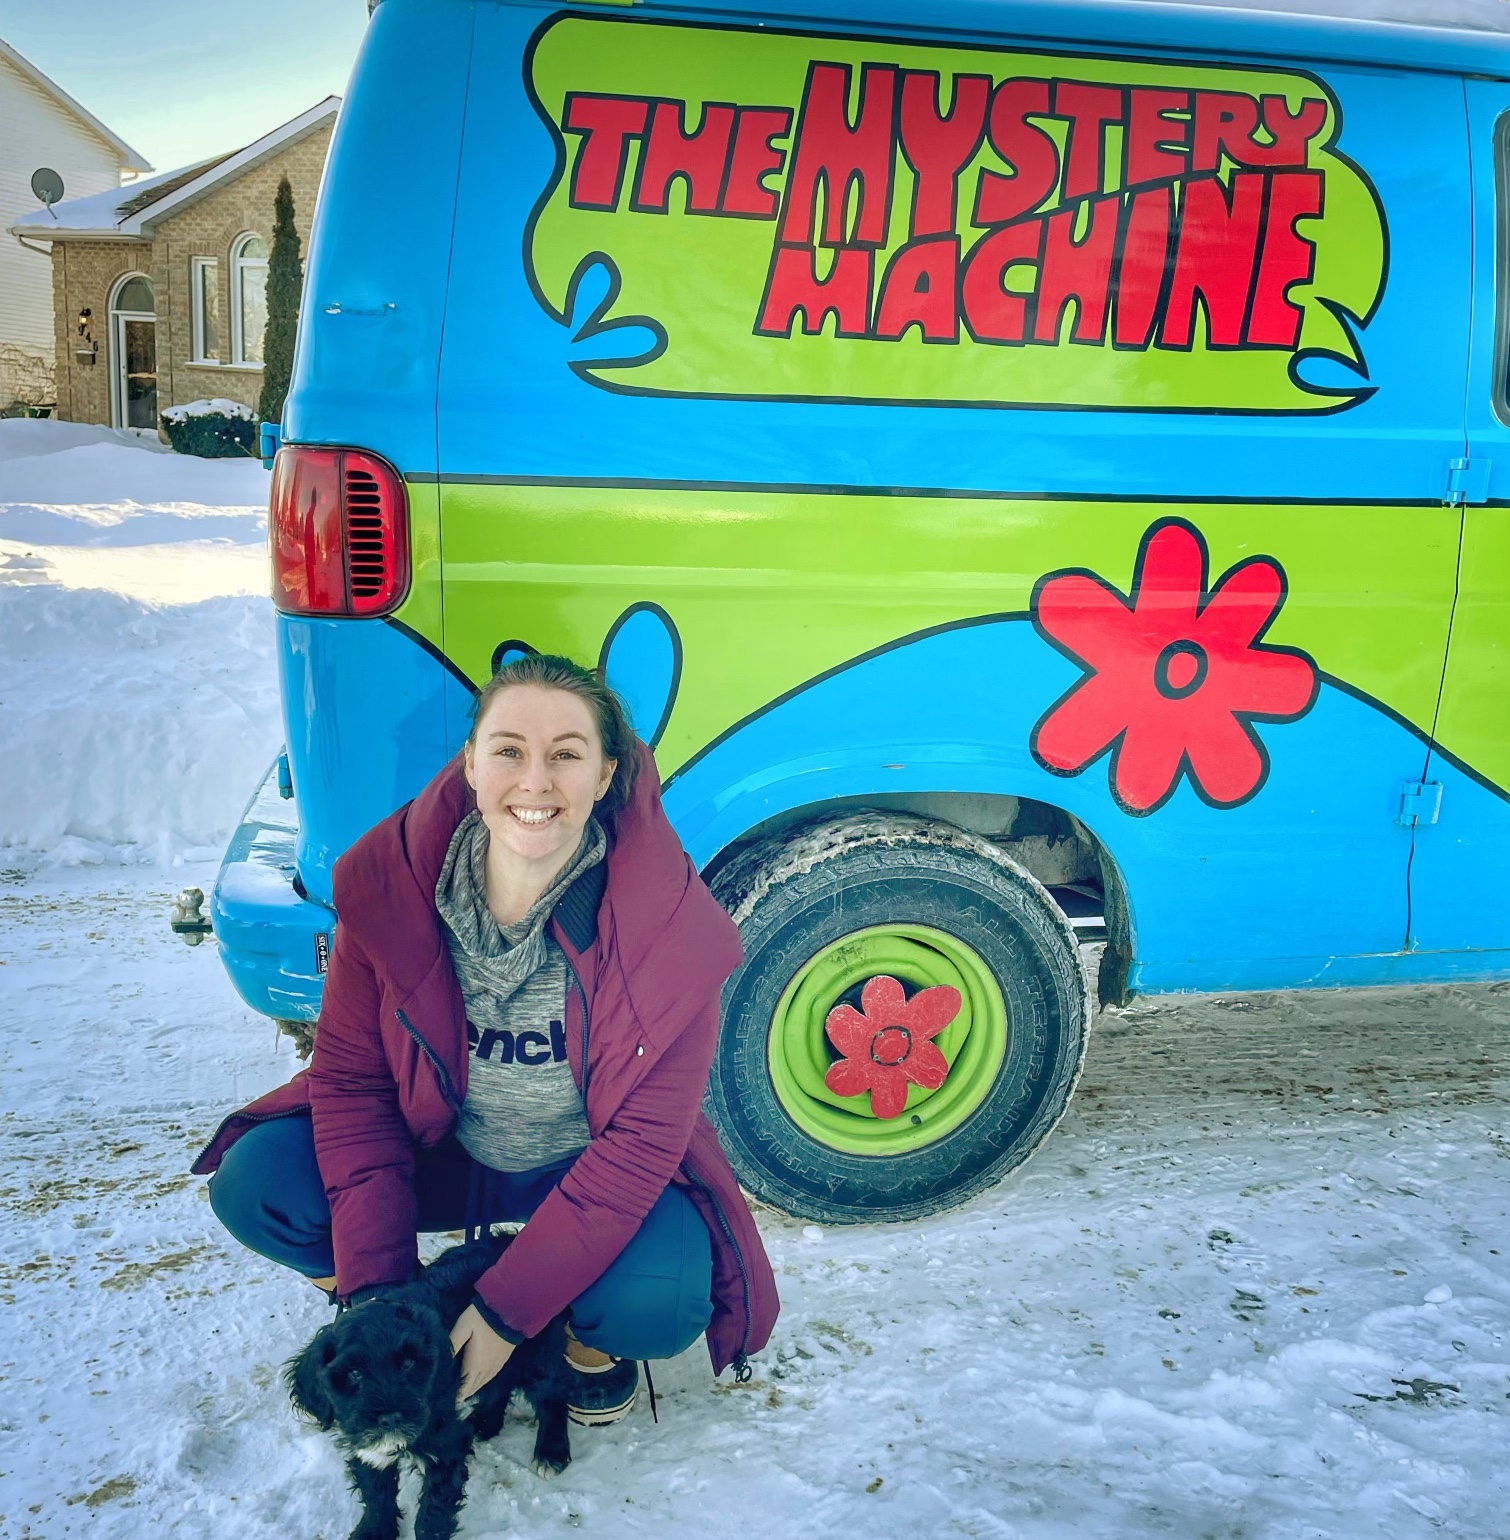 Casey kneeling with a small dog by the a van with 'The Mystery Machine' printed on it.